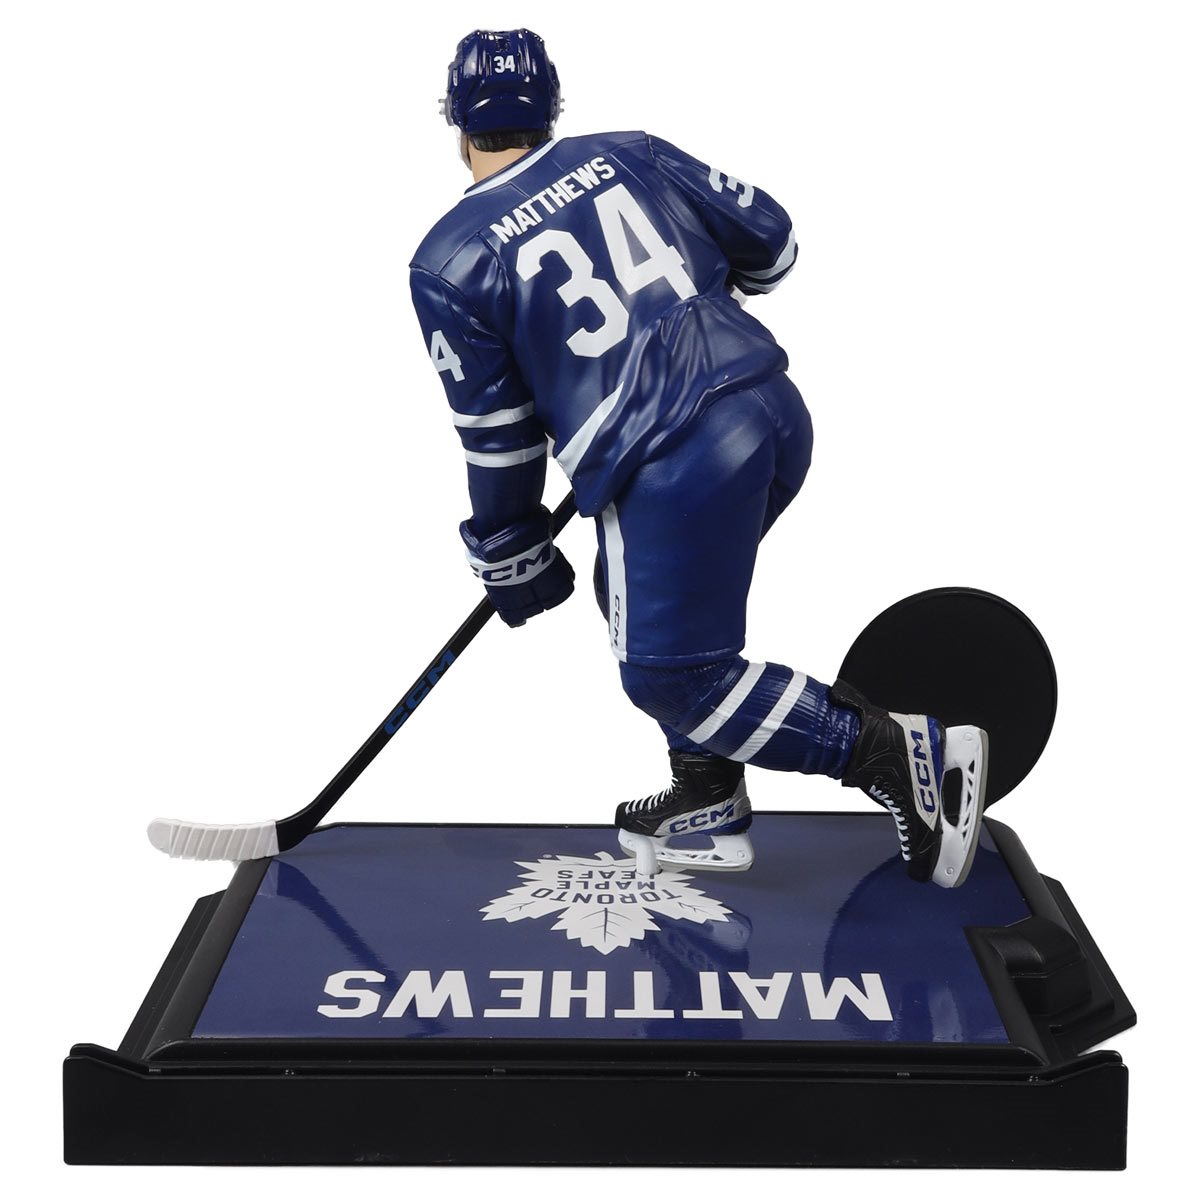 Toronto Maple Leafs Hot New Arrivals, Maple Leafs Collectibles, Maple Leafs  Hot New Arrivals Memorabilia